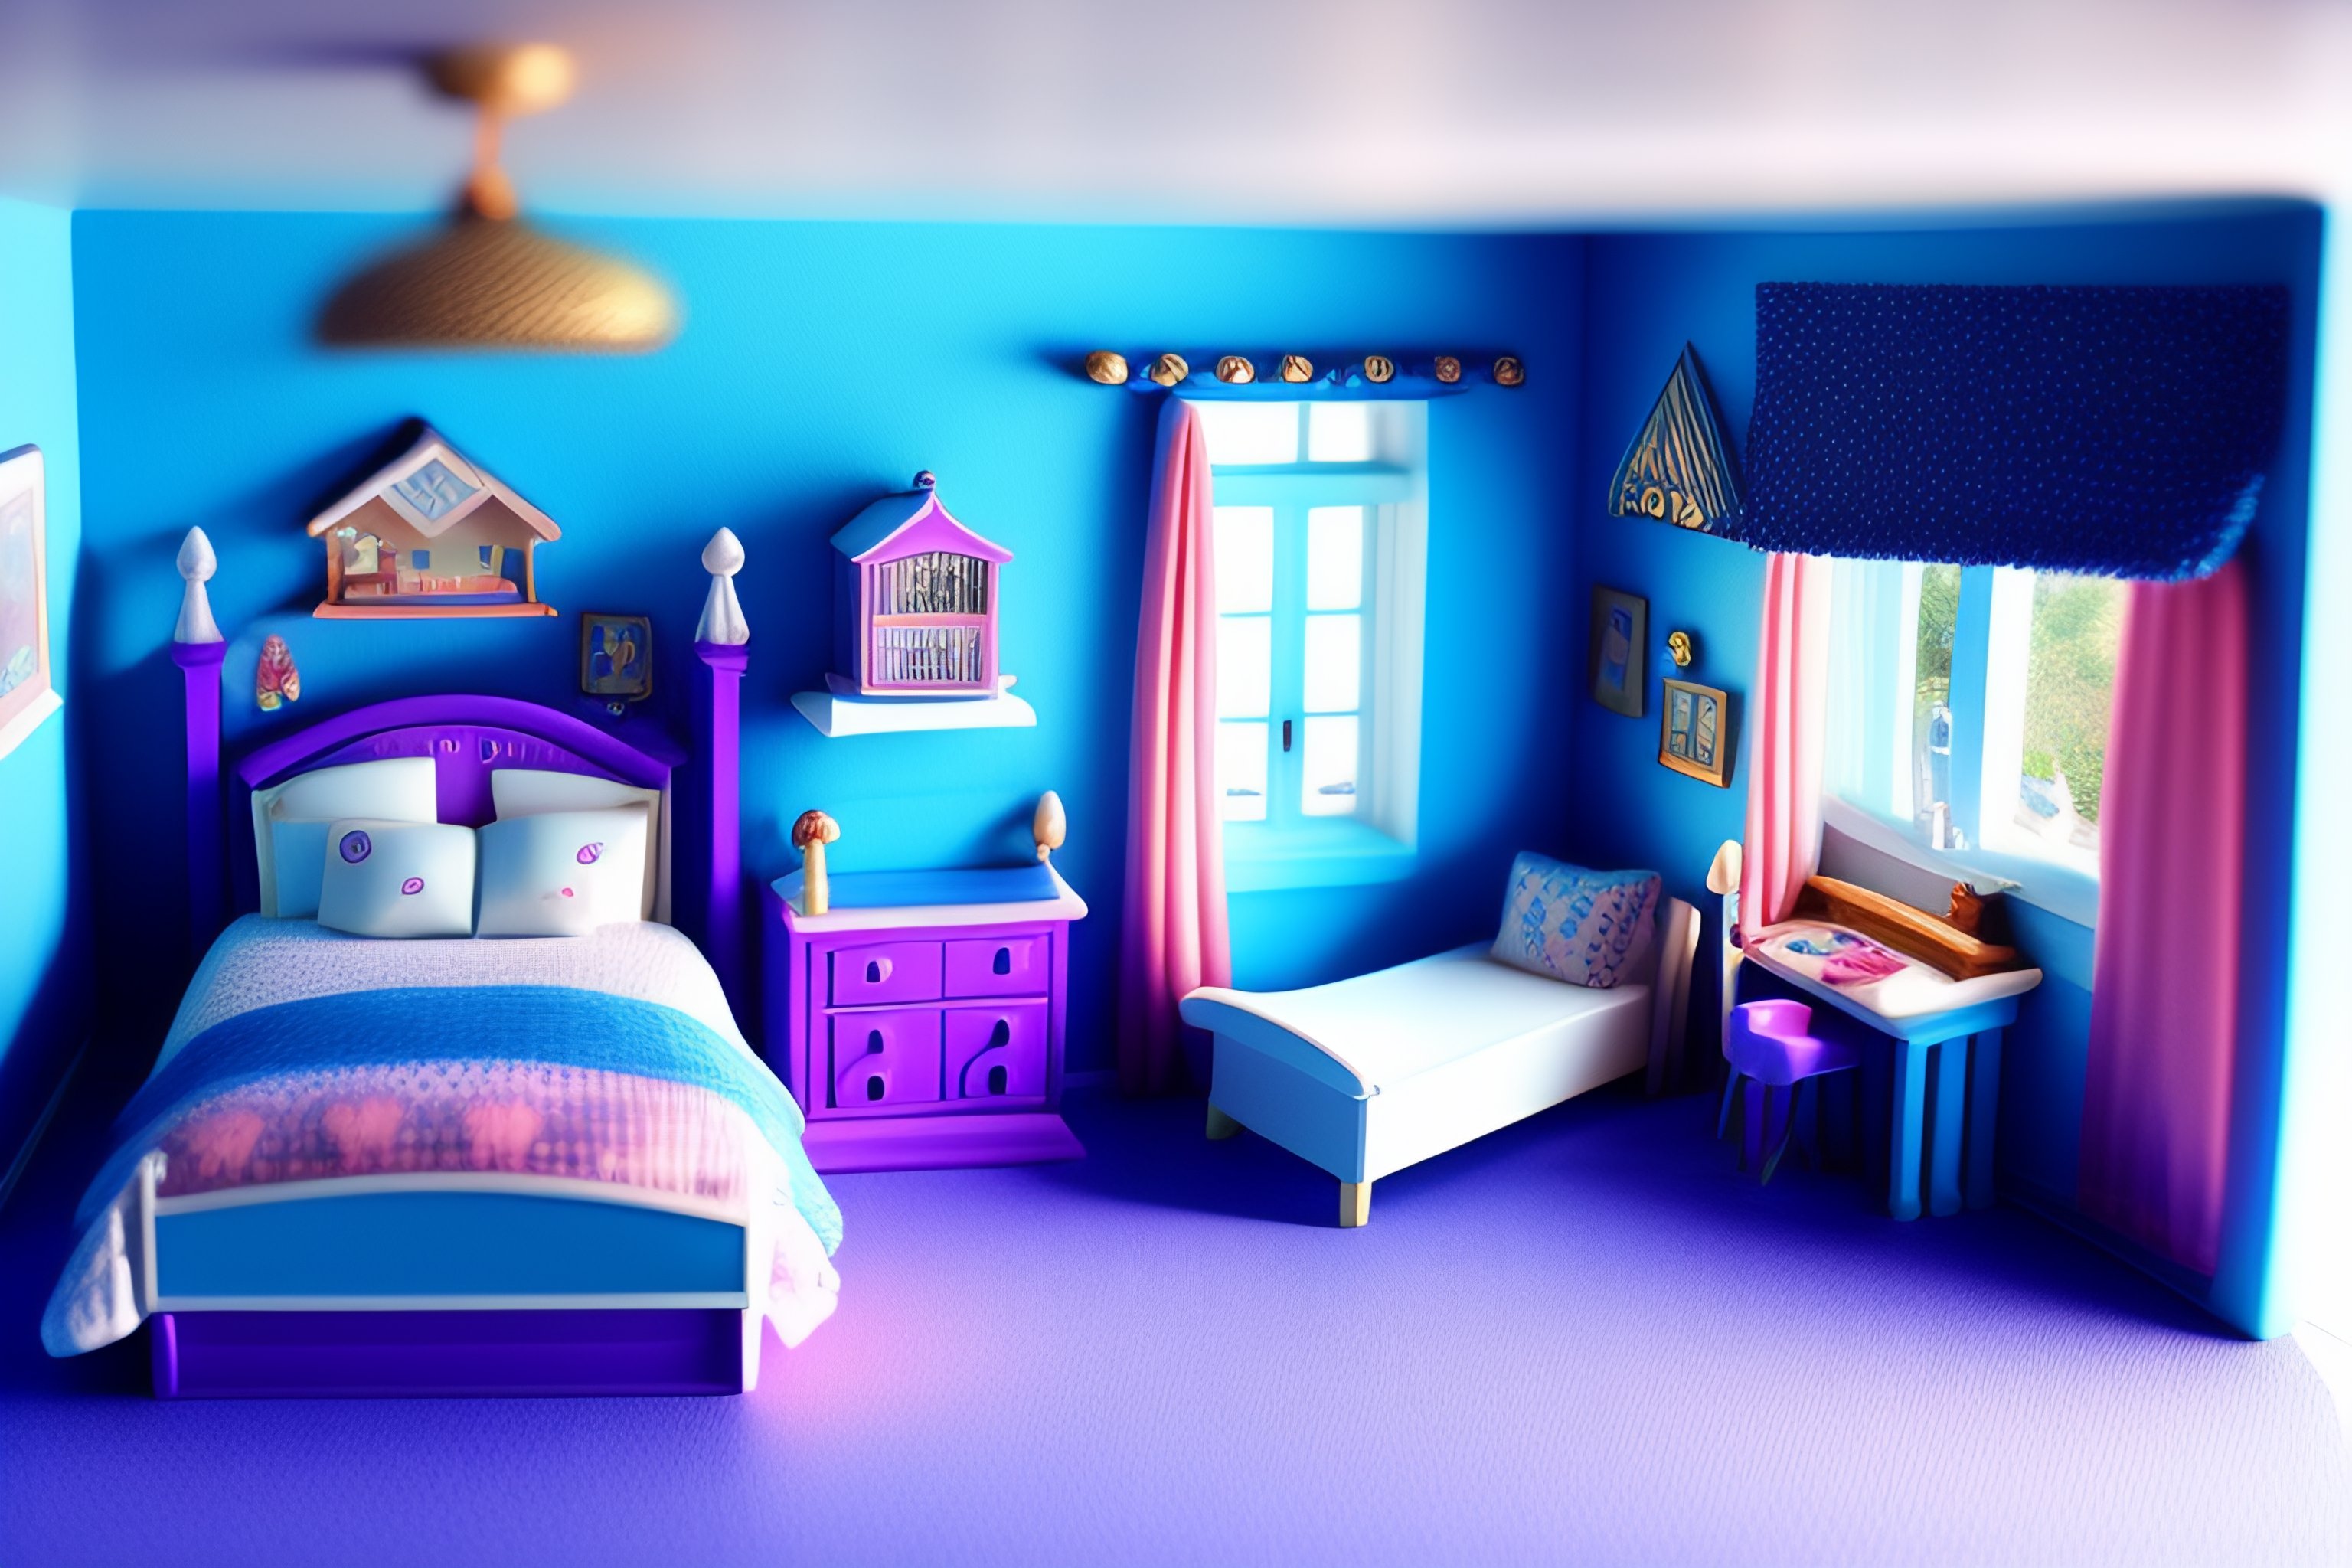 Lexica - Cute Drawing 2D side-on doll house room of a blue large